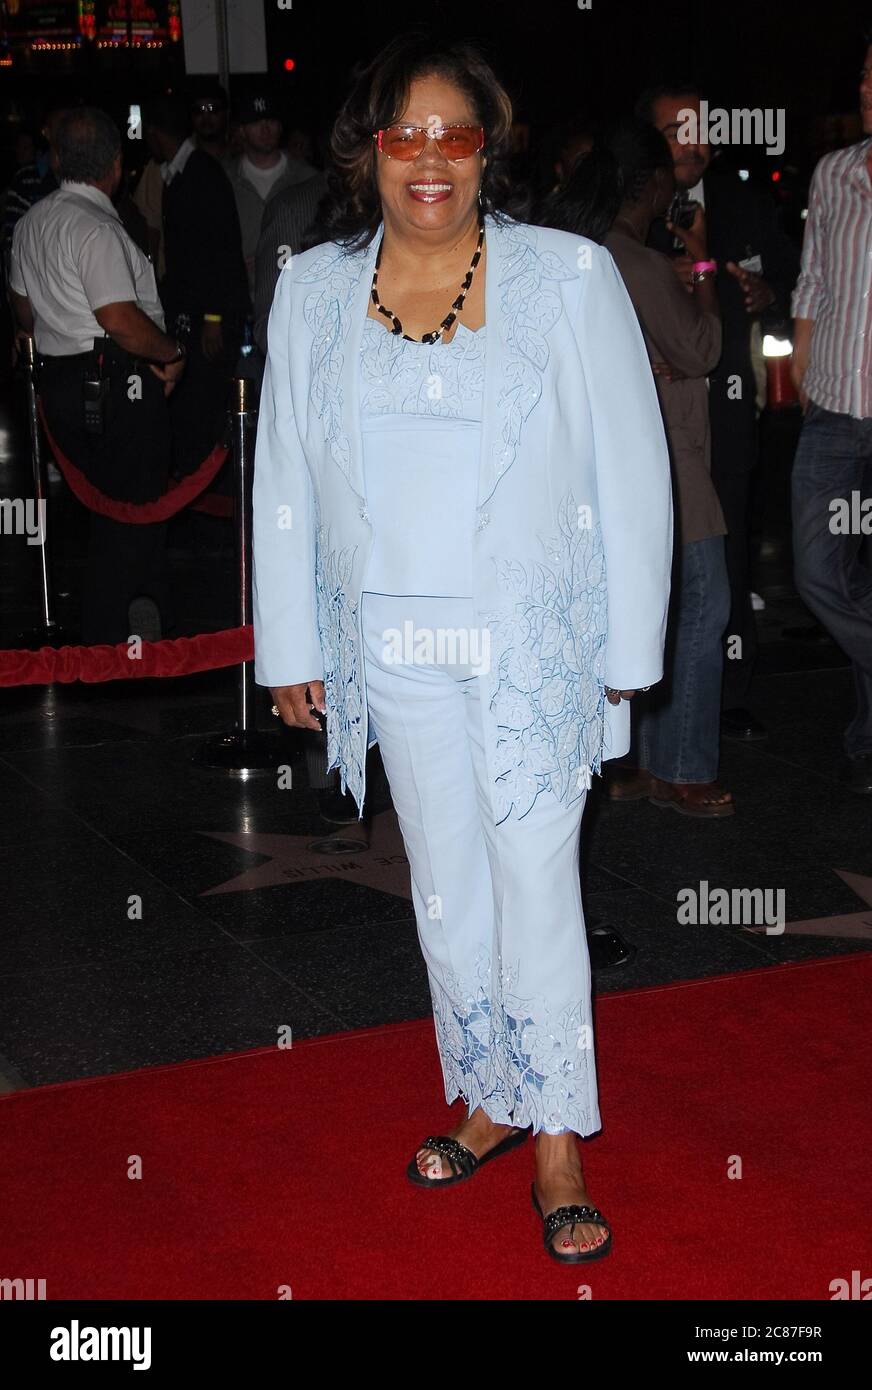 Mama Stokes at the Premiere of 'Somebody Help Me' held at the Grauman's Chinese Theater in Hollywood, CA. The event took place on Thursday, October25, 2007. Photo by: SBM / PictureLux- File Reference # 34006-9826SBMPLX Stock Photo